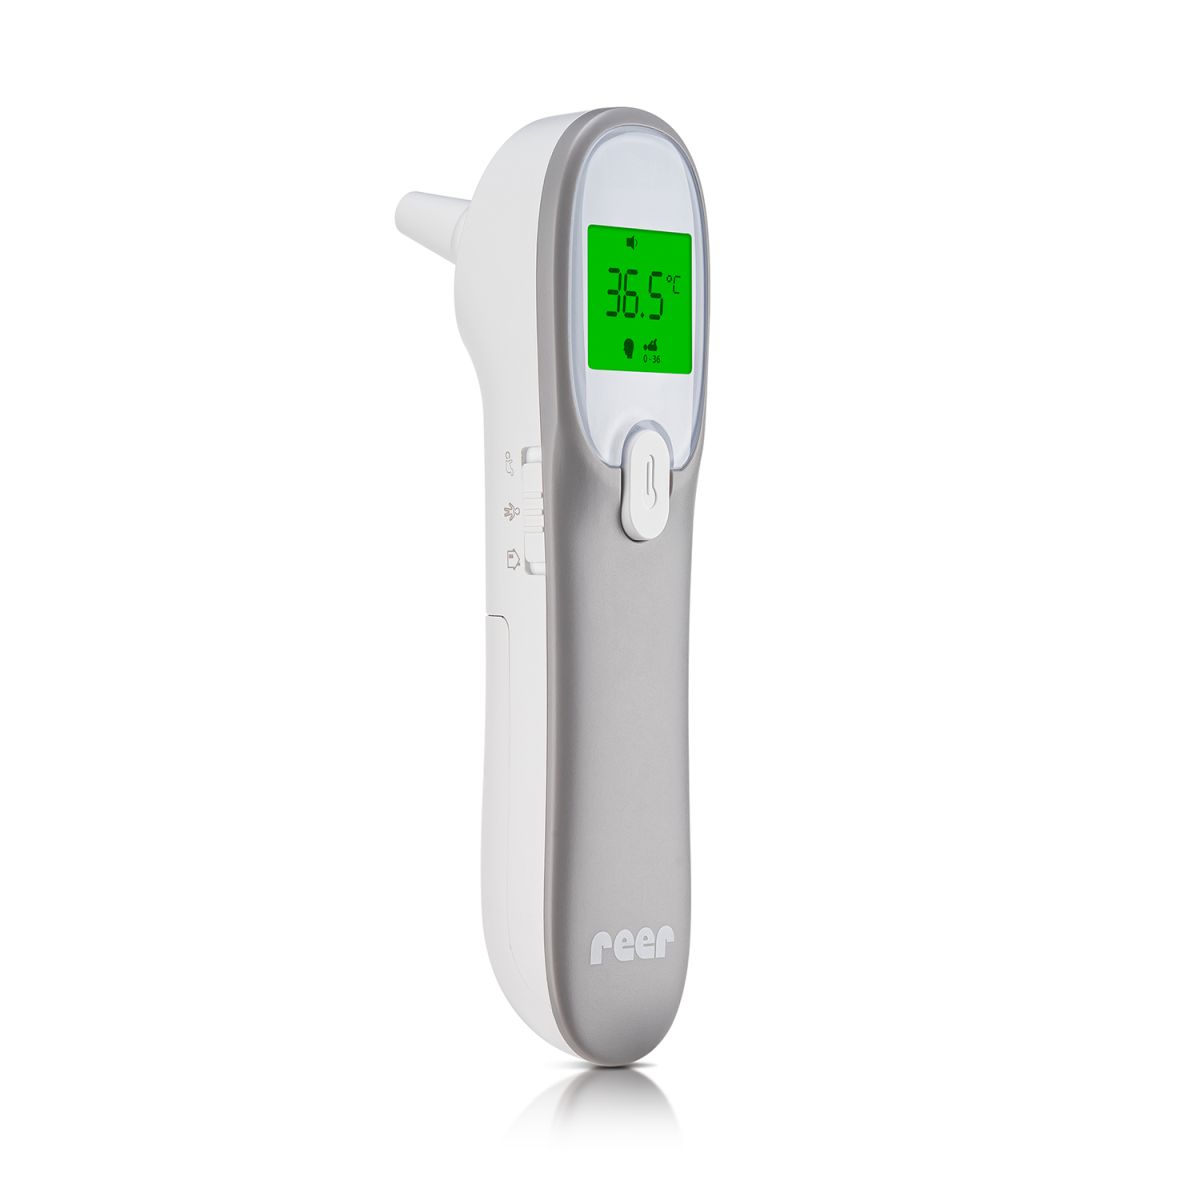 Colour EarTemp 3in1 infrared clinical thermometer